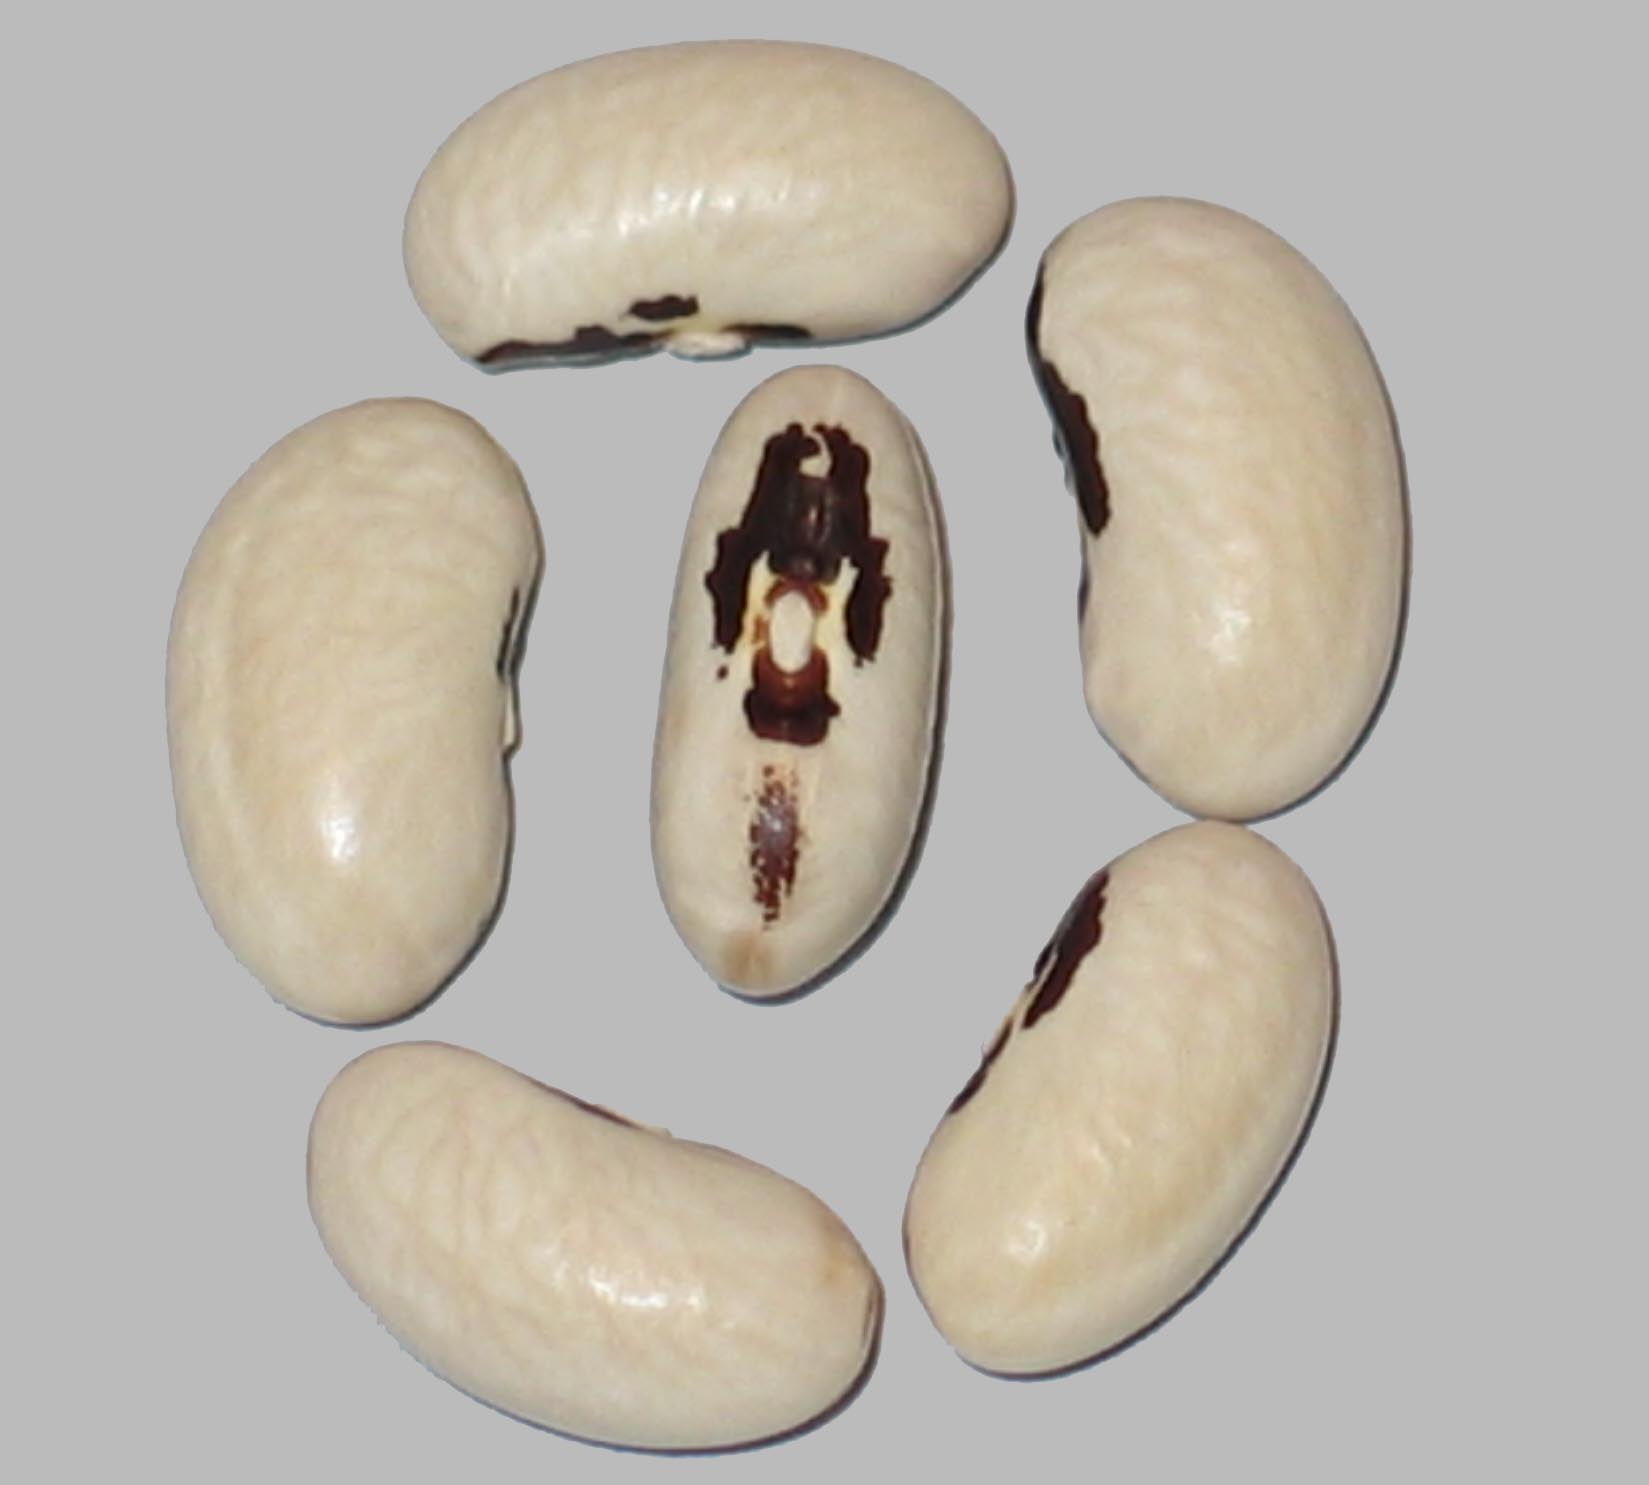 image of Southern Soldier beans